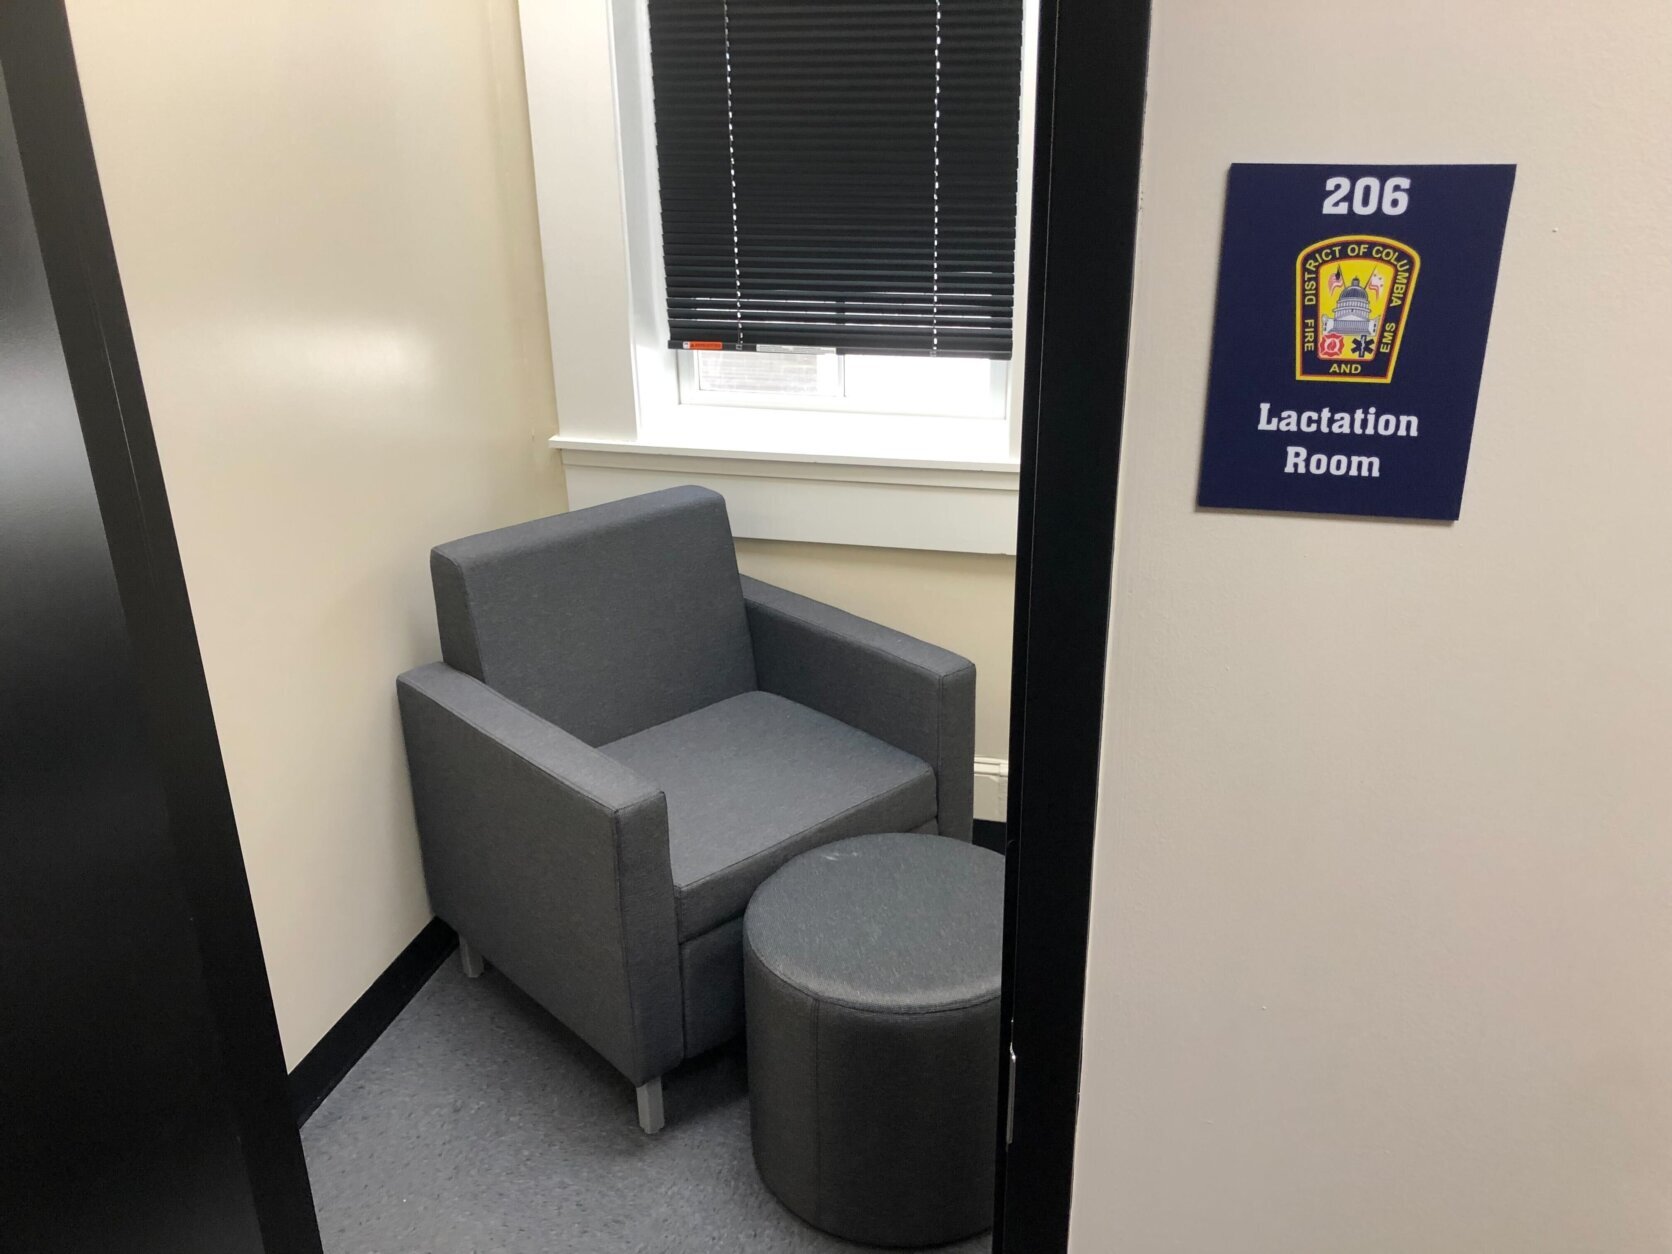 <p>A lactation room is also among the upgrades at the firehouse.</p>
